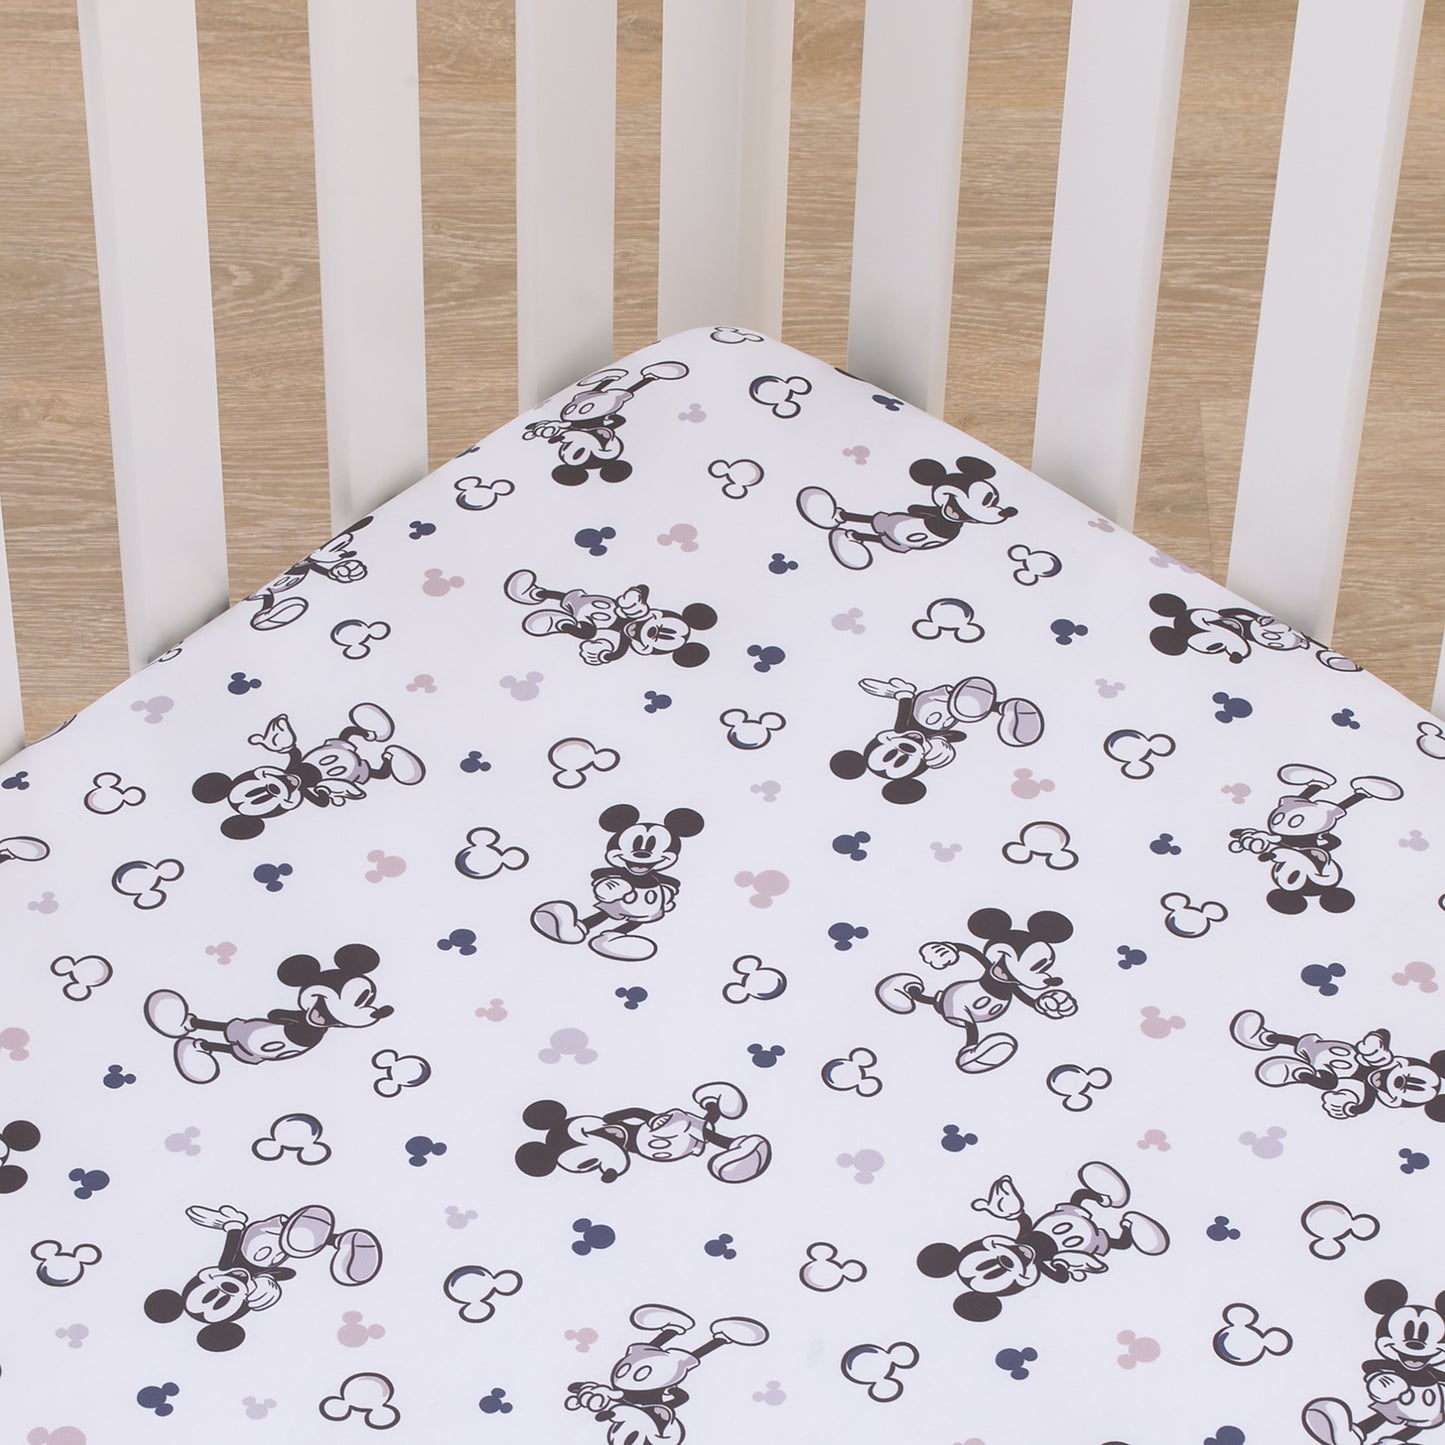 Disney Mickey Mouse Gray, Black, and White Super Soft Nursery Fitted Mini Crib Sheet